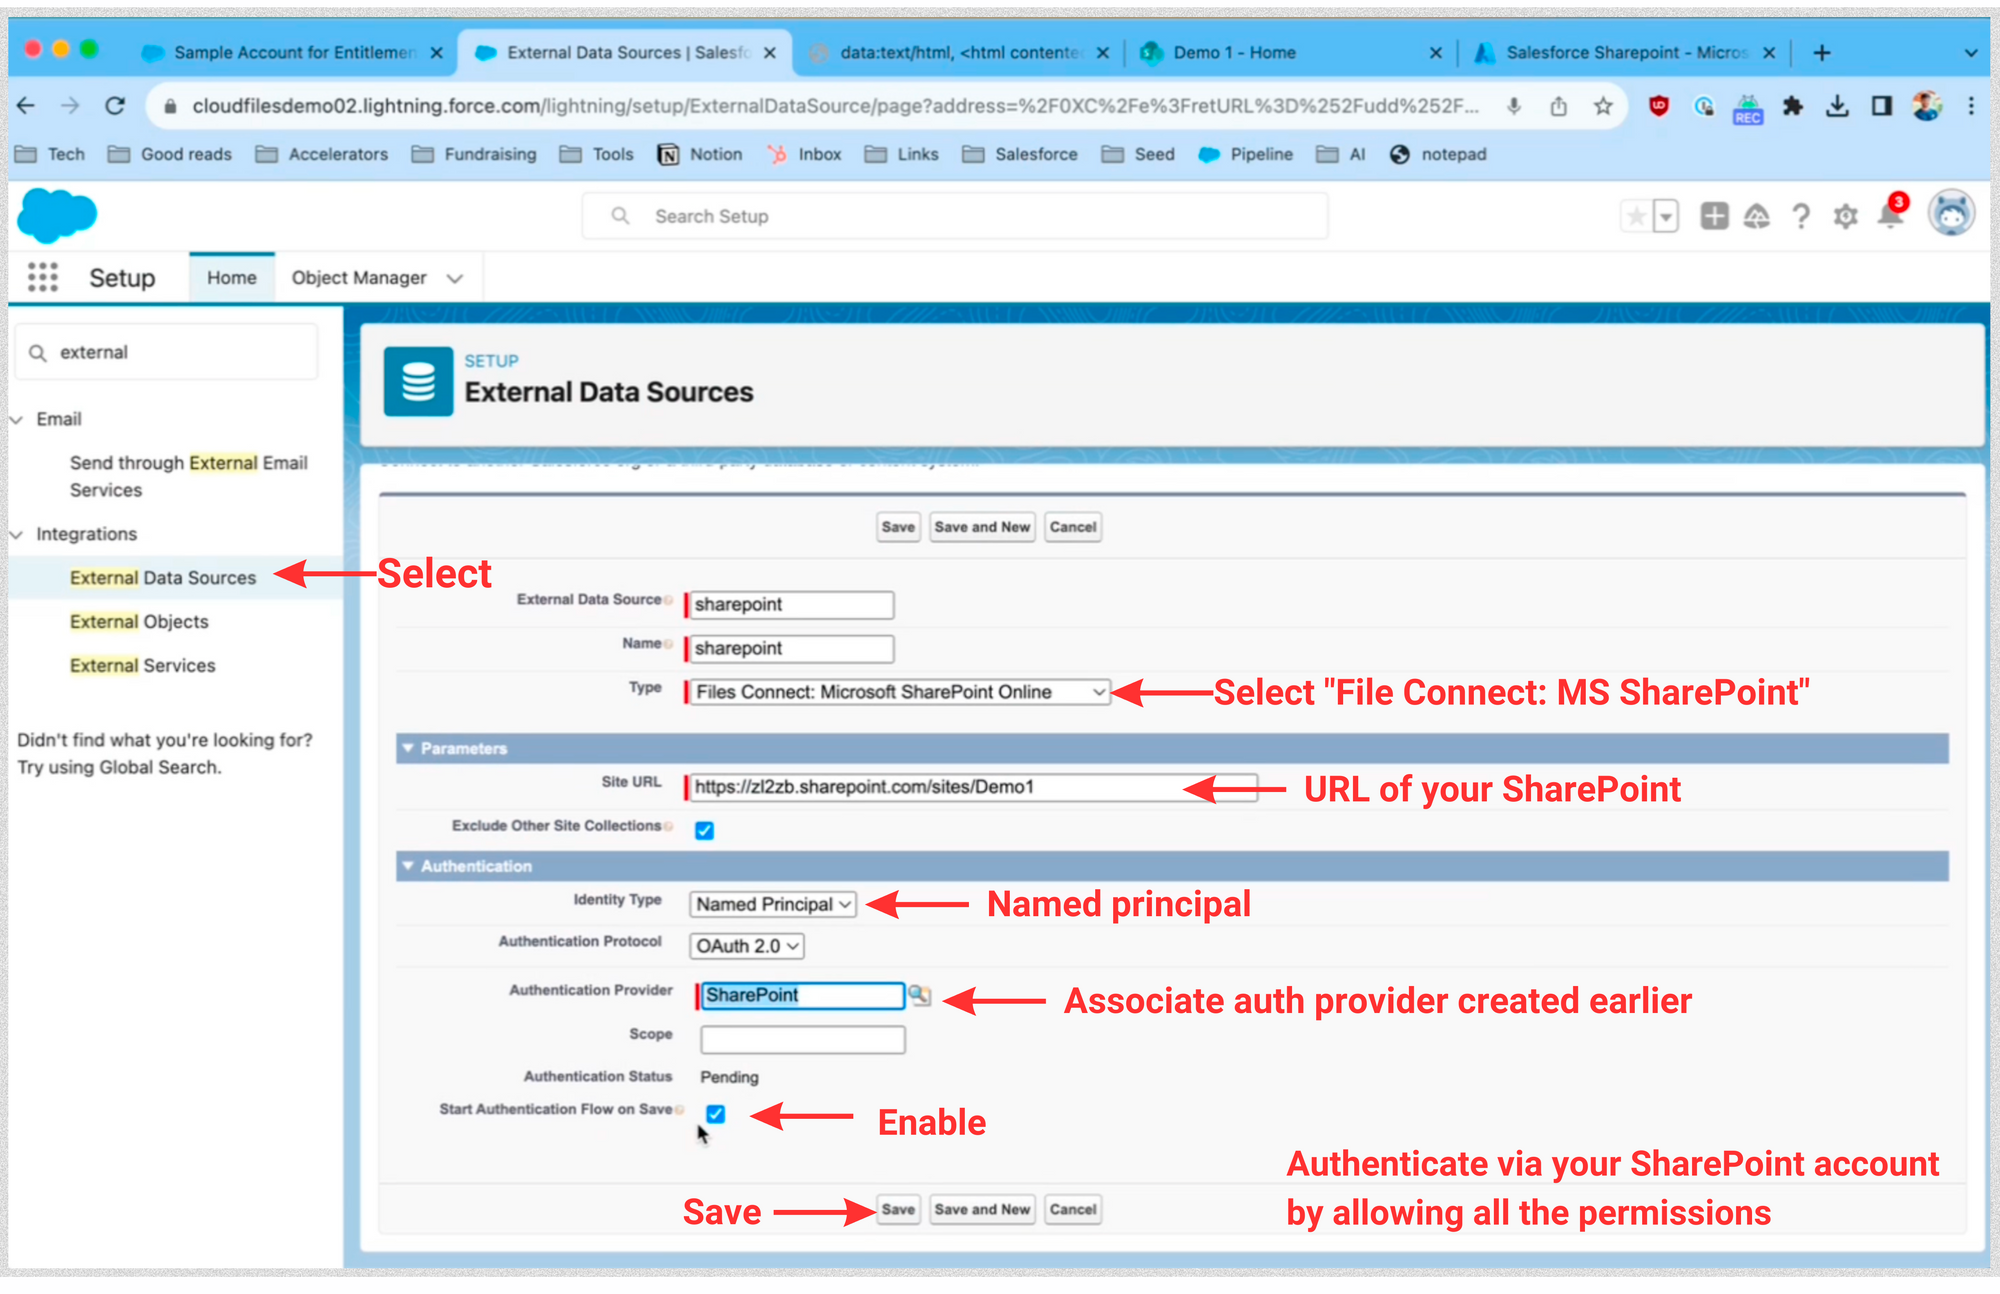 The Ultimate Guide to Salesforce SharePoint Integration